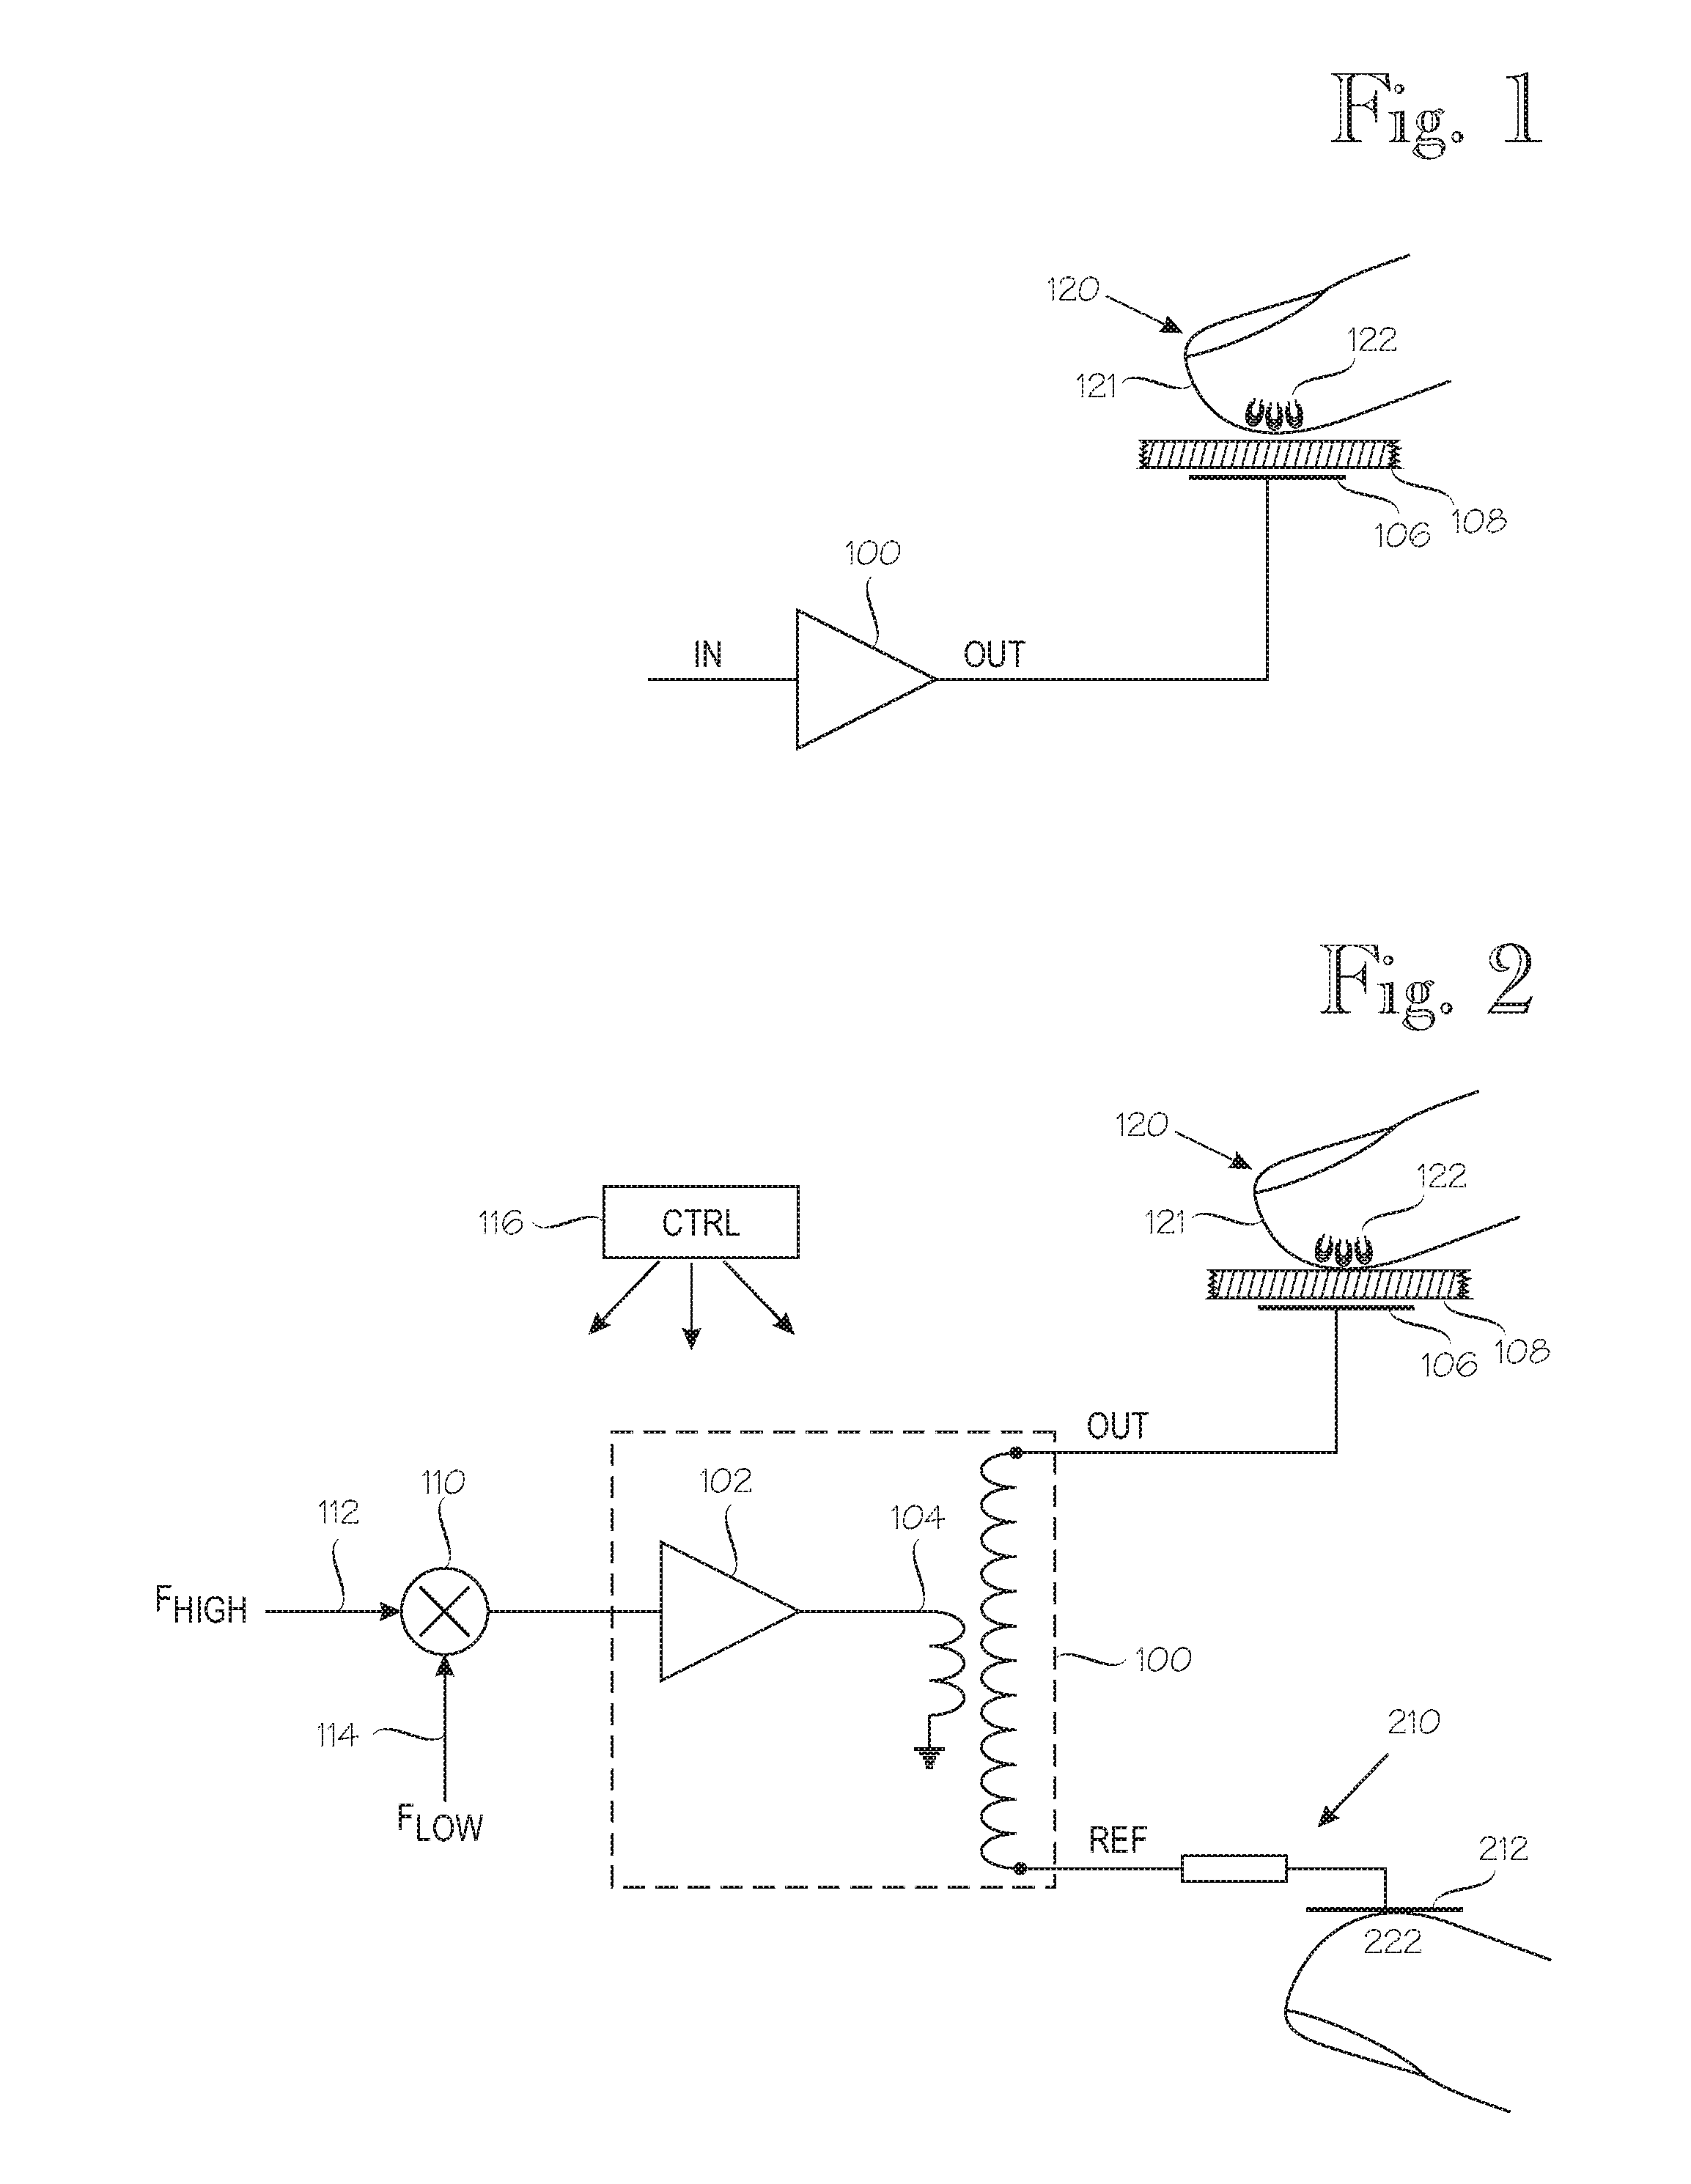 Interface apparatus for touch input and tactile output communication